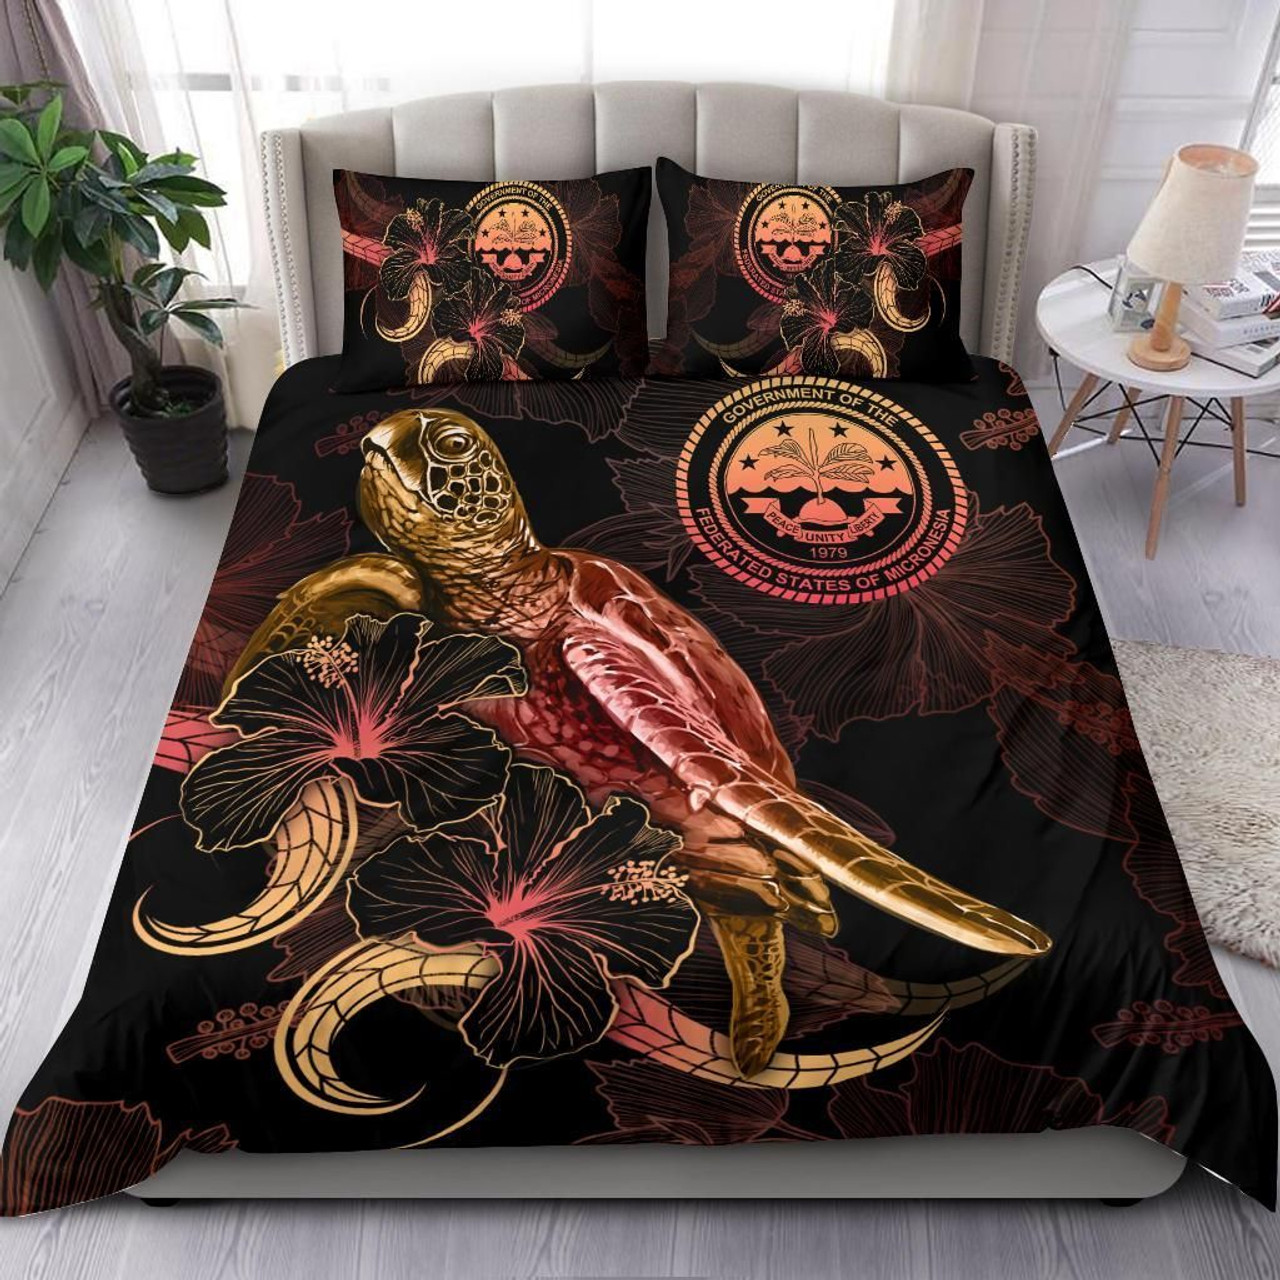 Federated States Of Micronesia Polynesian Bedding Set - Turtle With Blooming Hibiscus Gold 1